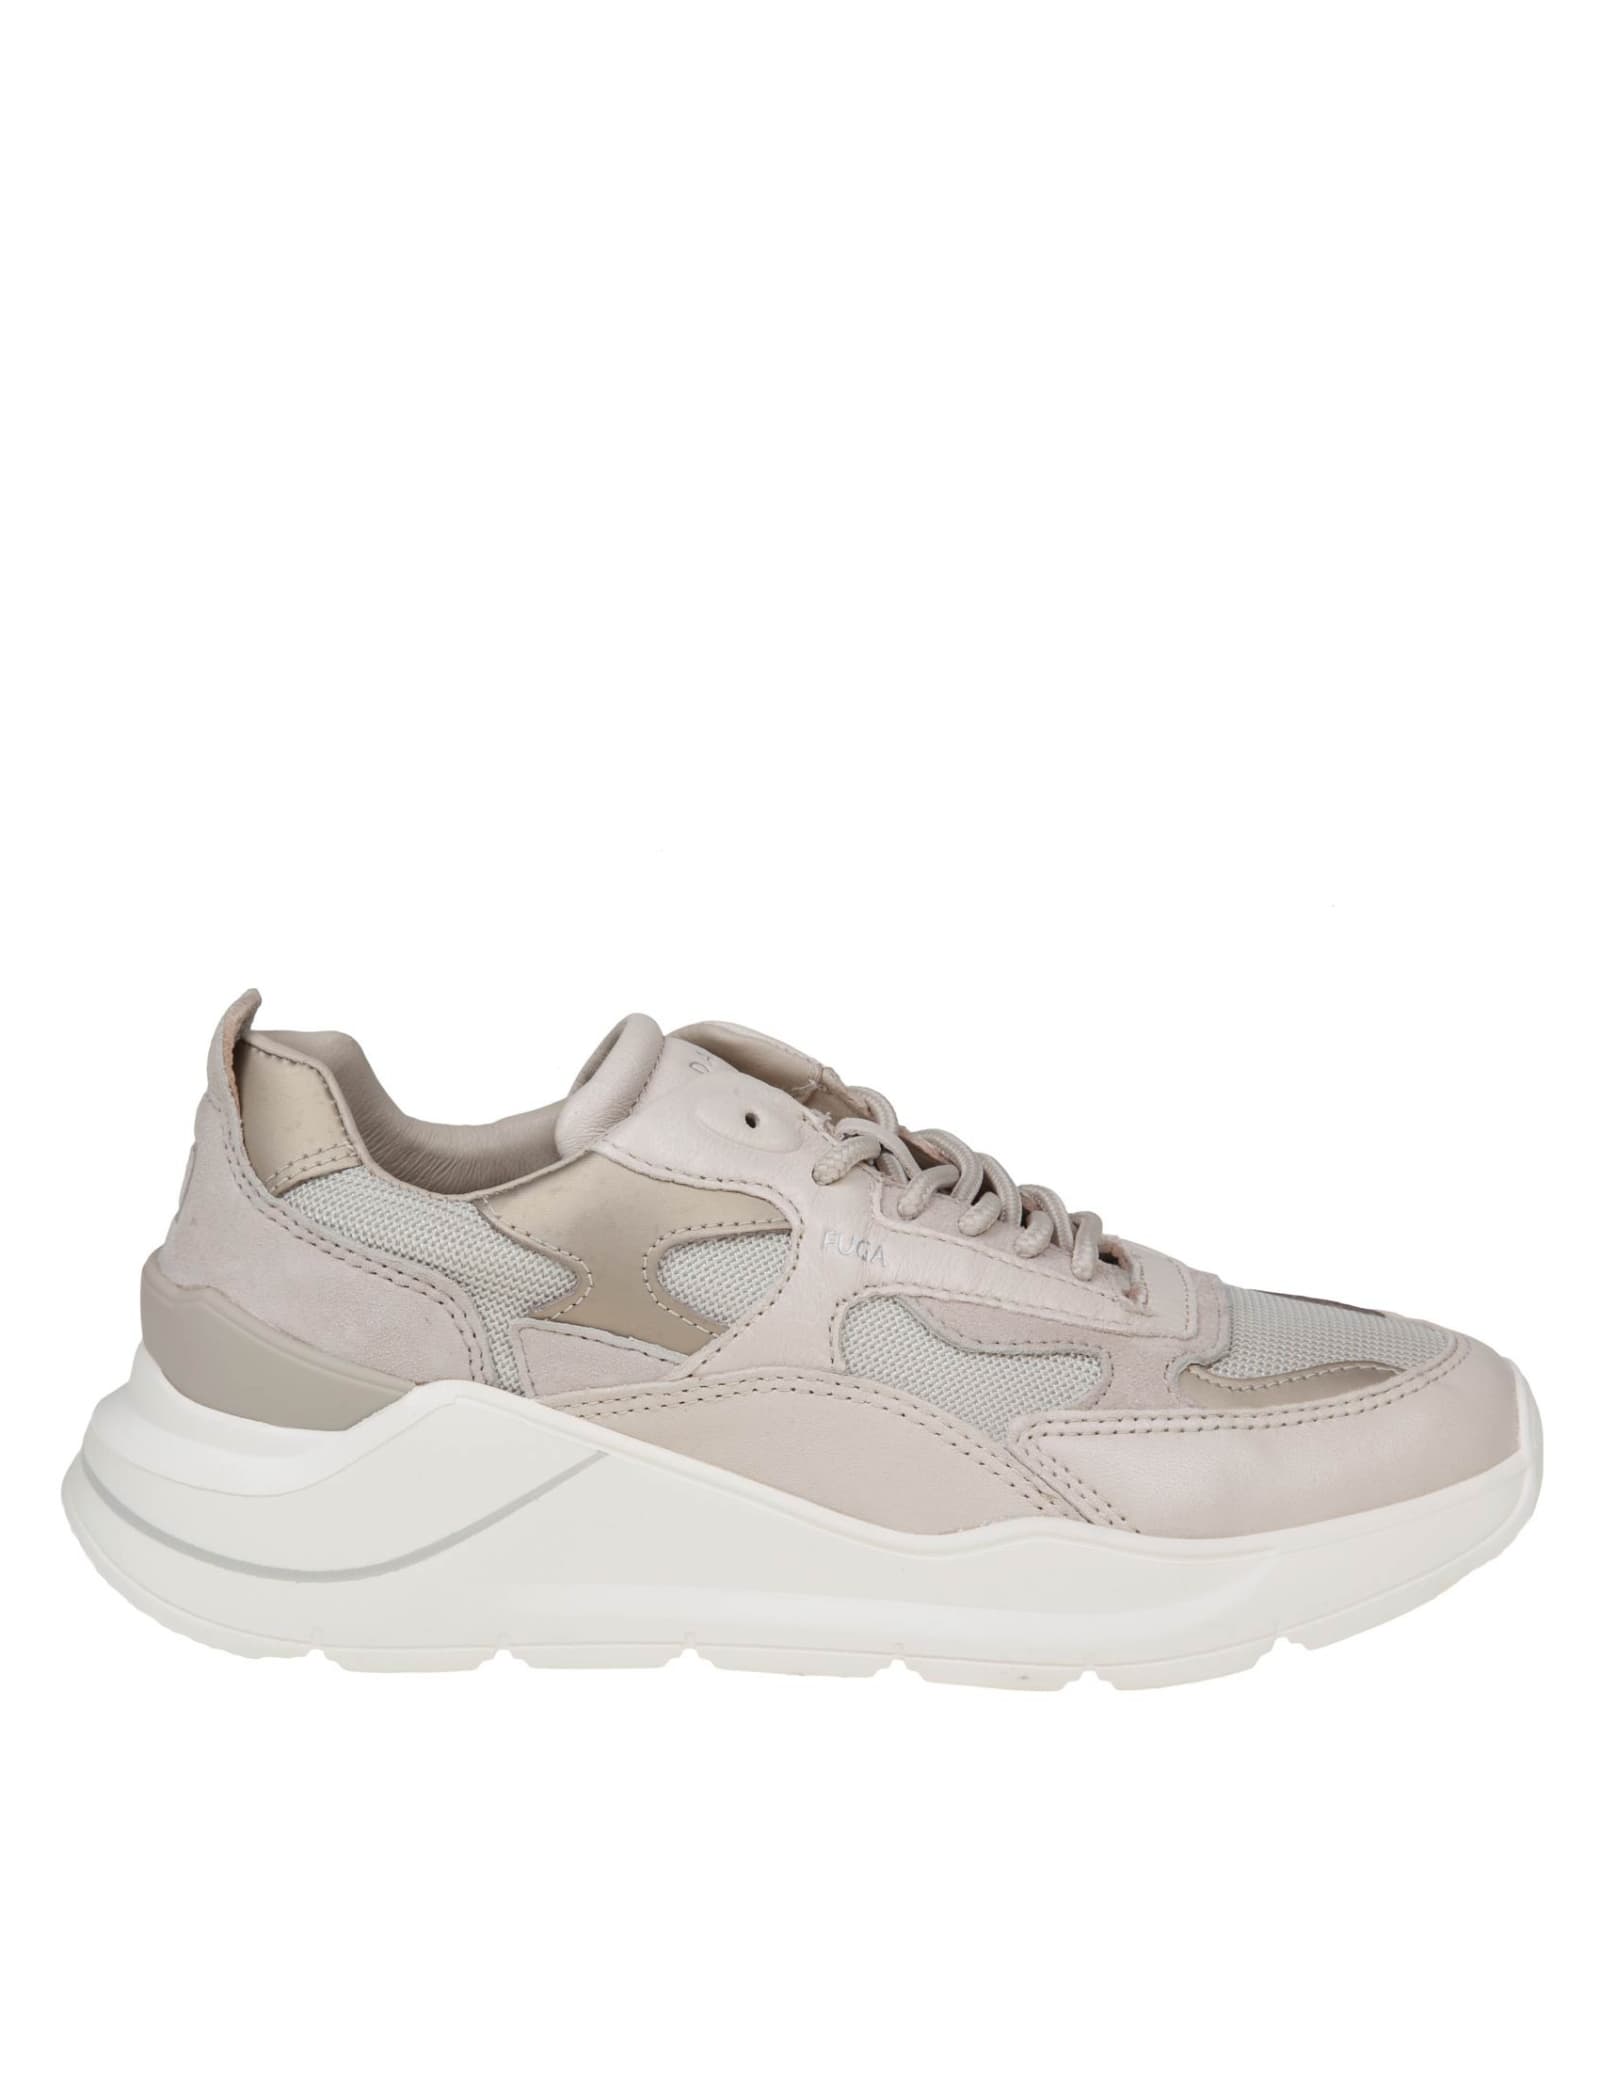 DATE FUGA MONO SNEAKERS IN LEATHER AND IVORY COLOR FABRIC